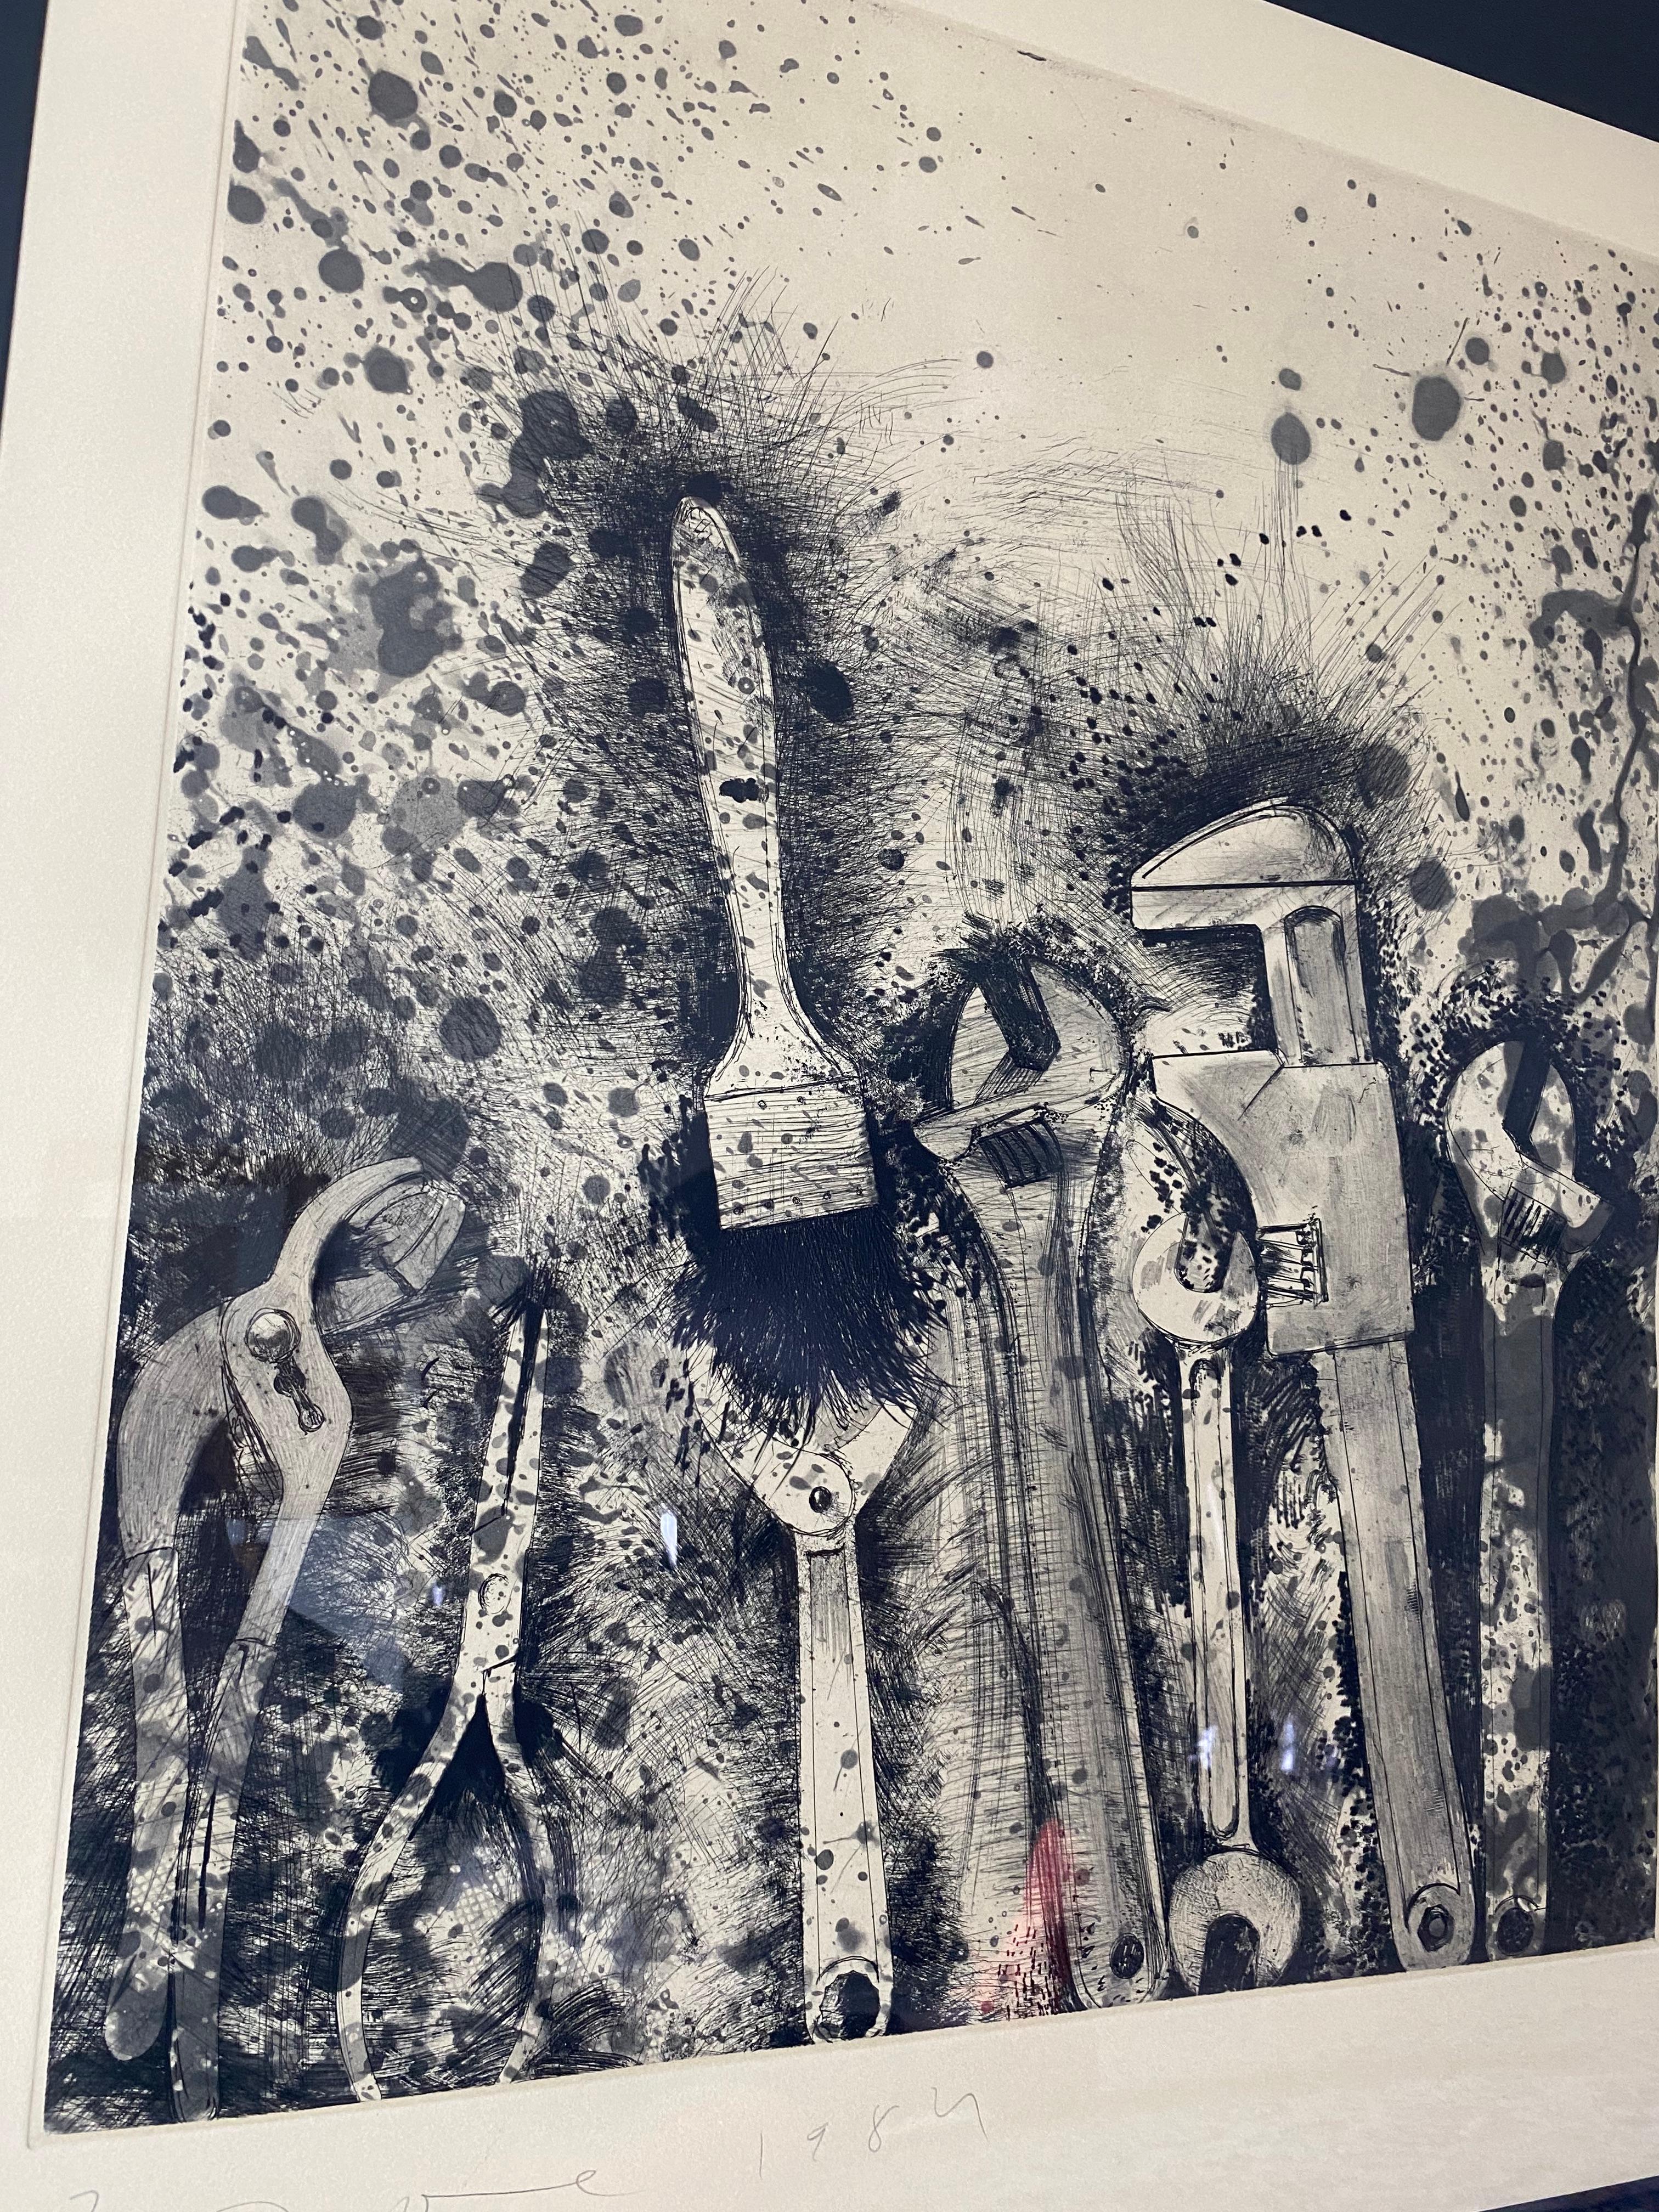 The New French Tools 3 (For Pep) - Print by Jim Dine